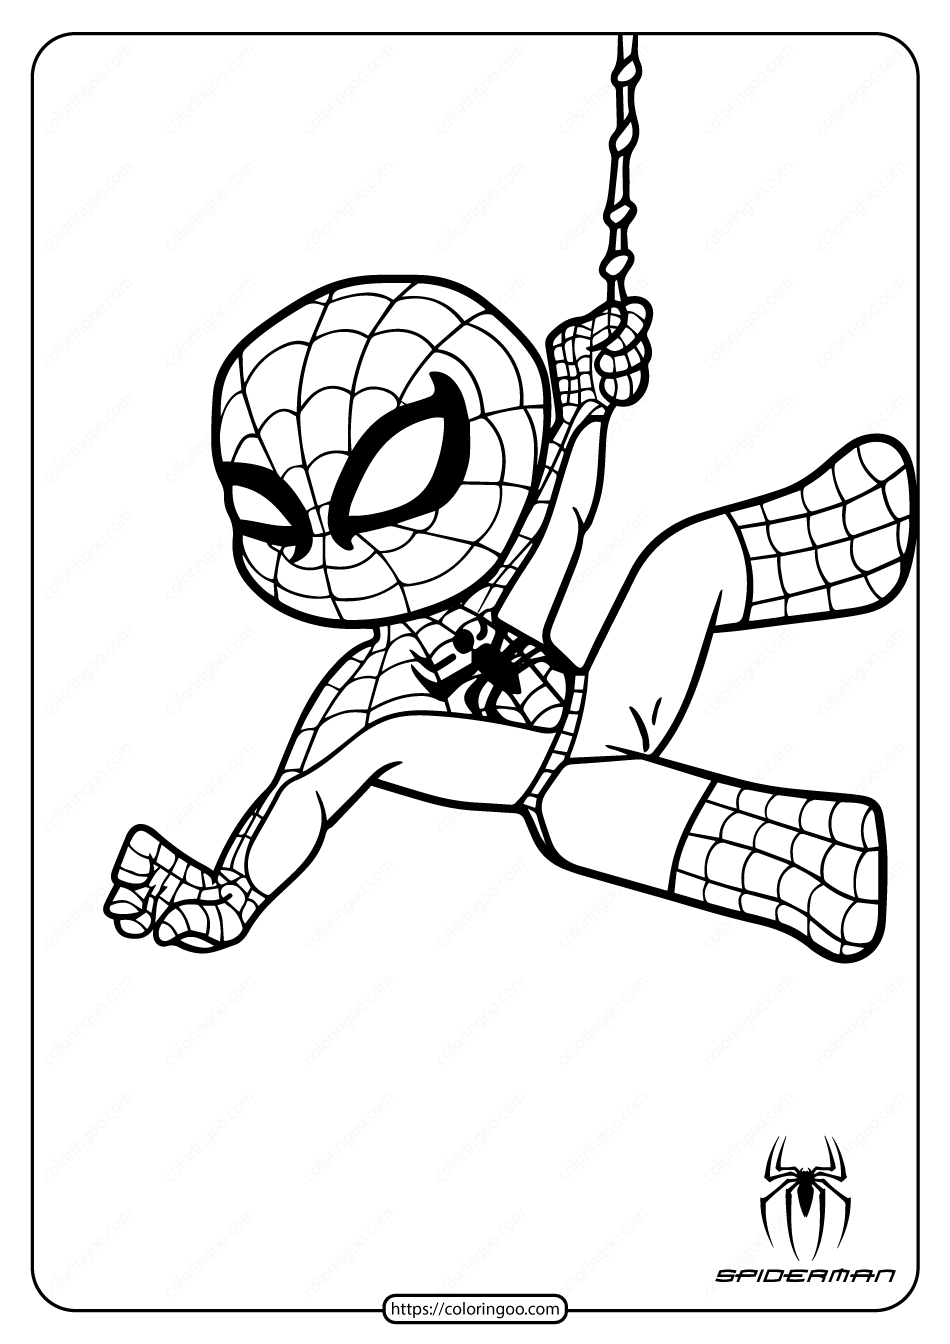 cute-spiderman-coloring-page-for-kids-spiderman-coloring-superhero